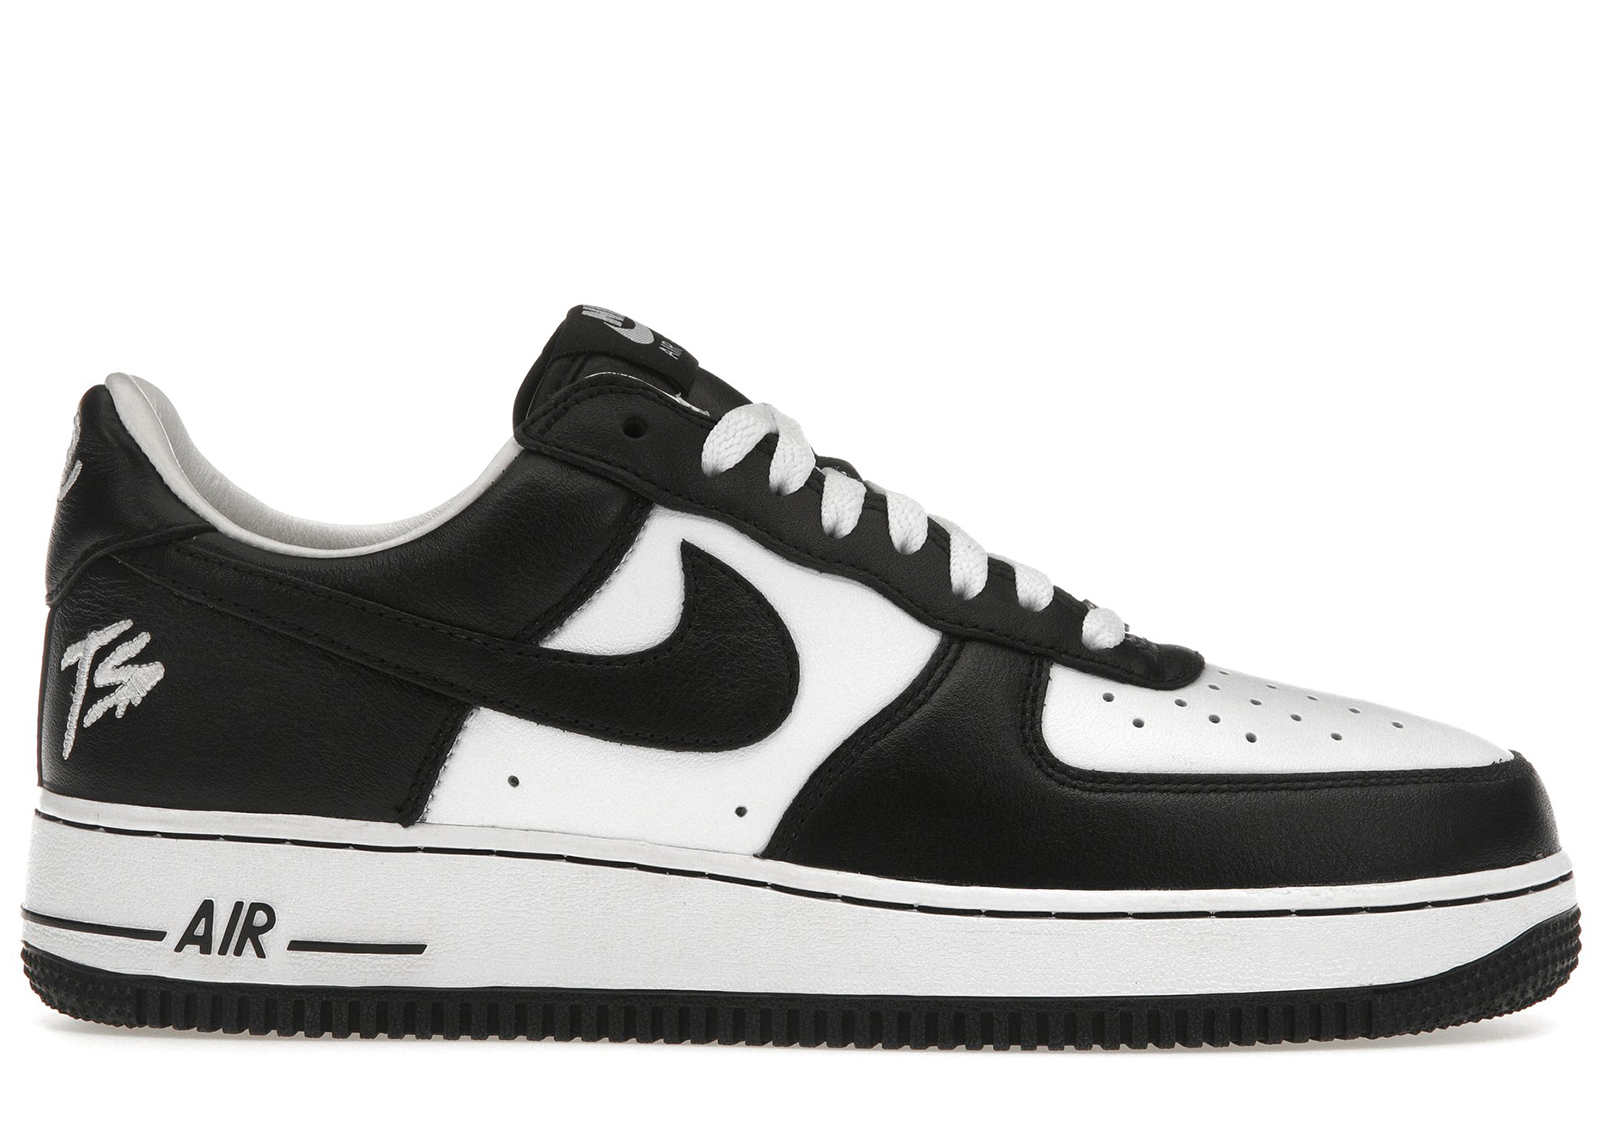 Terror Squad Nike Air Force 1 Low 26.5cm